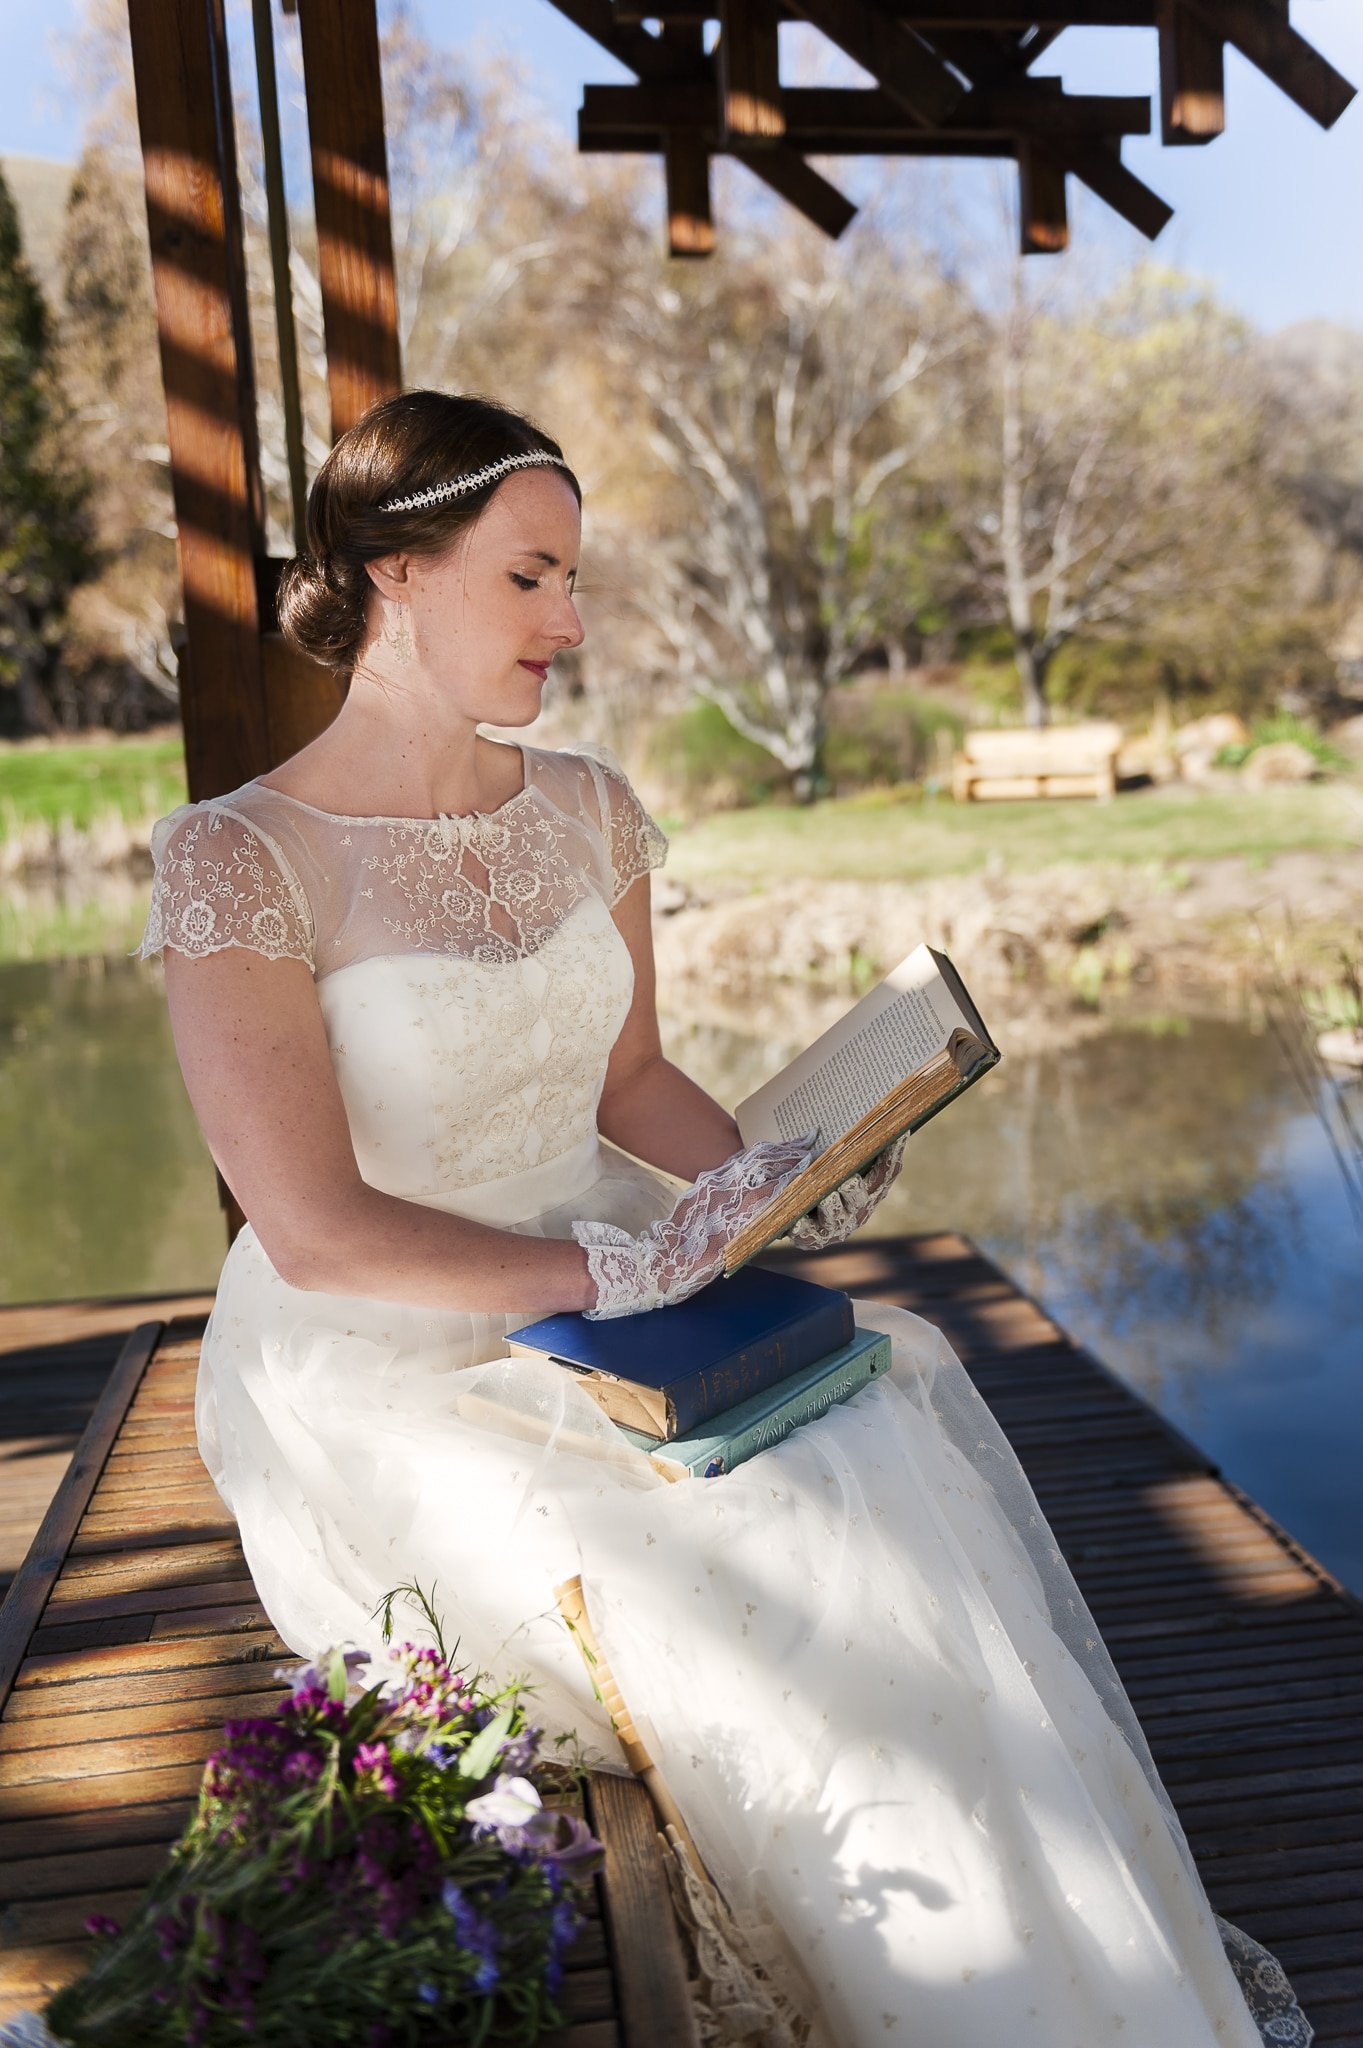 A bride-to-be in wedding attire reads some of her favorite books under a shaded gazebo during her bridal portrait session in a garden.